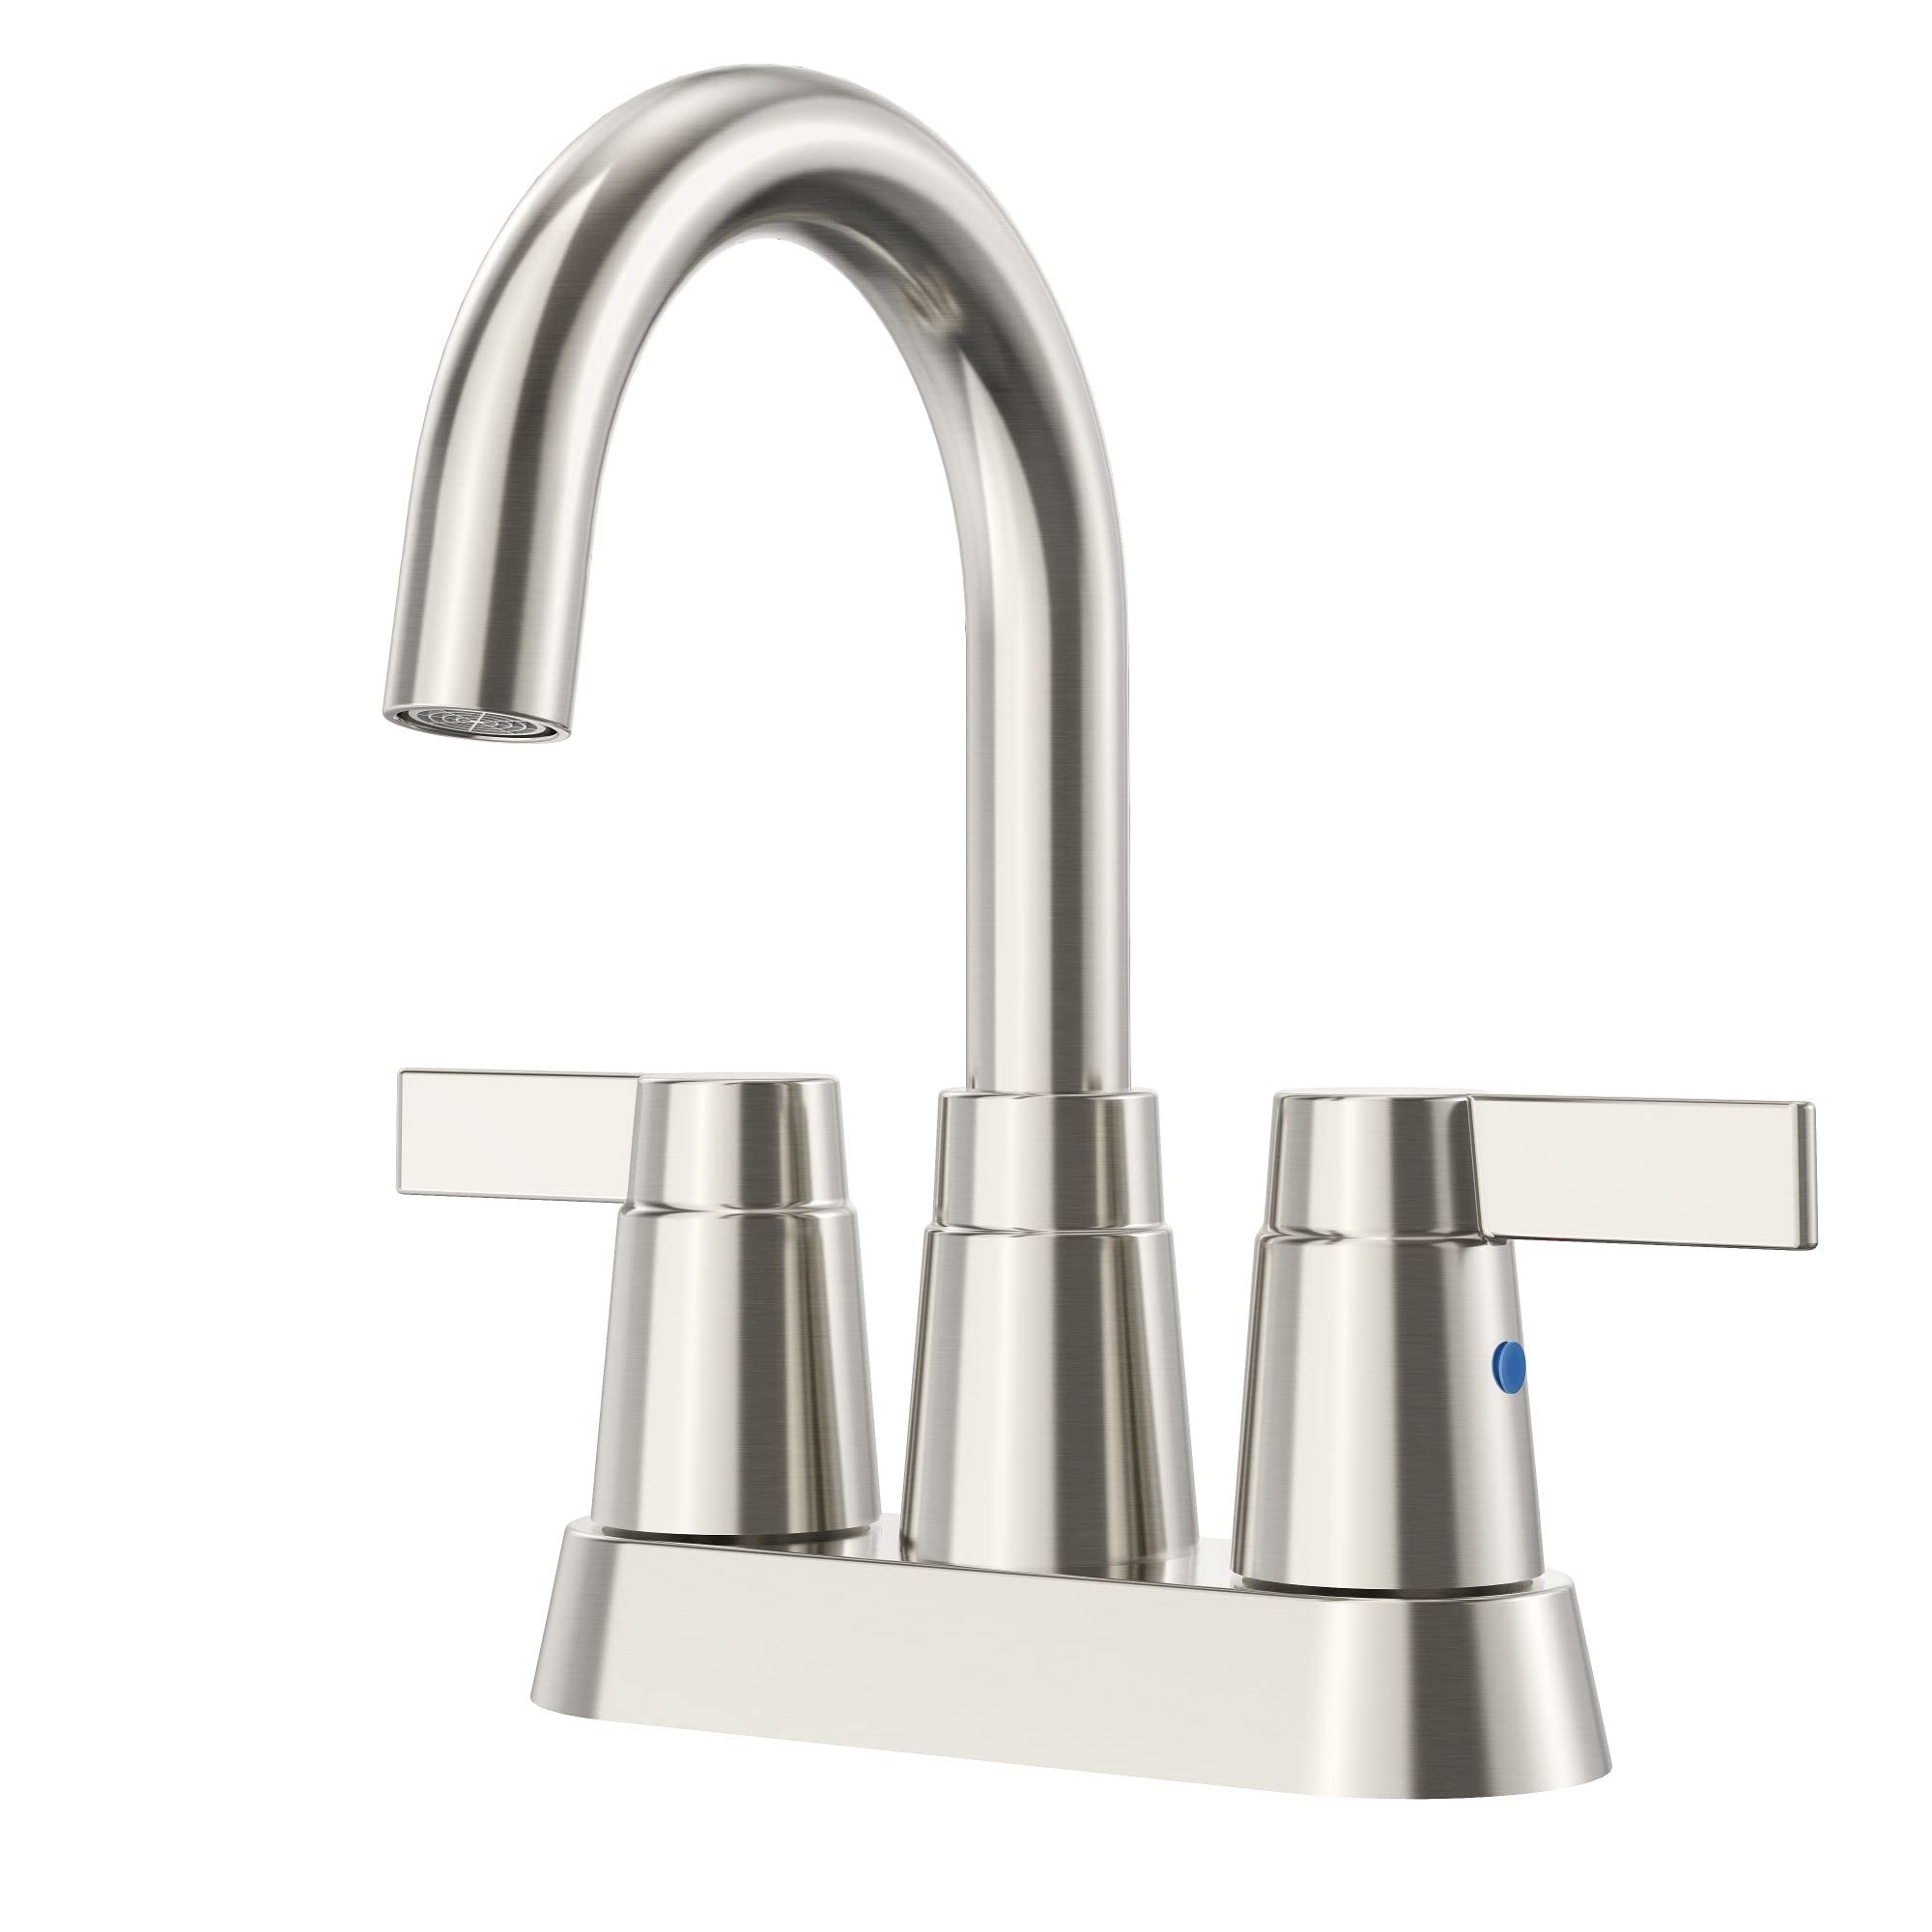 Bathroom Sink Faucet 3 Hole, Faucet for Bathroom Sink High Arc, Brushed Nickel Bathroom Faucet, 2-Handle Centerset Bathroom Faucet with Pop-up Drain and Water Supply Lines, 1.2 GPM